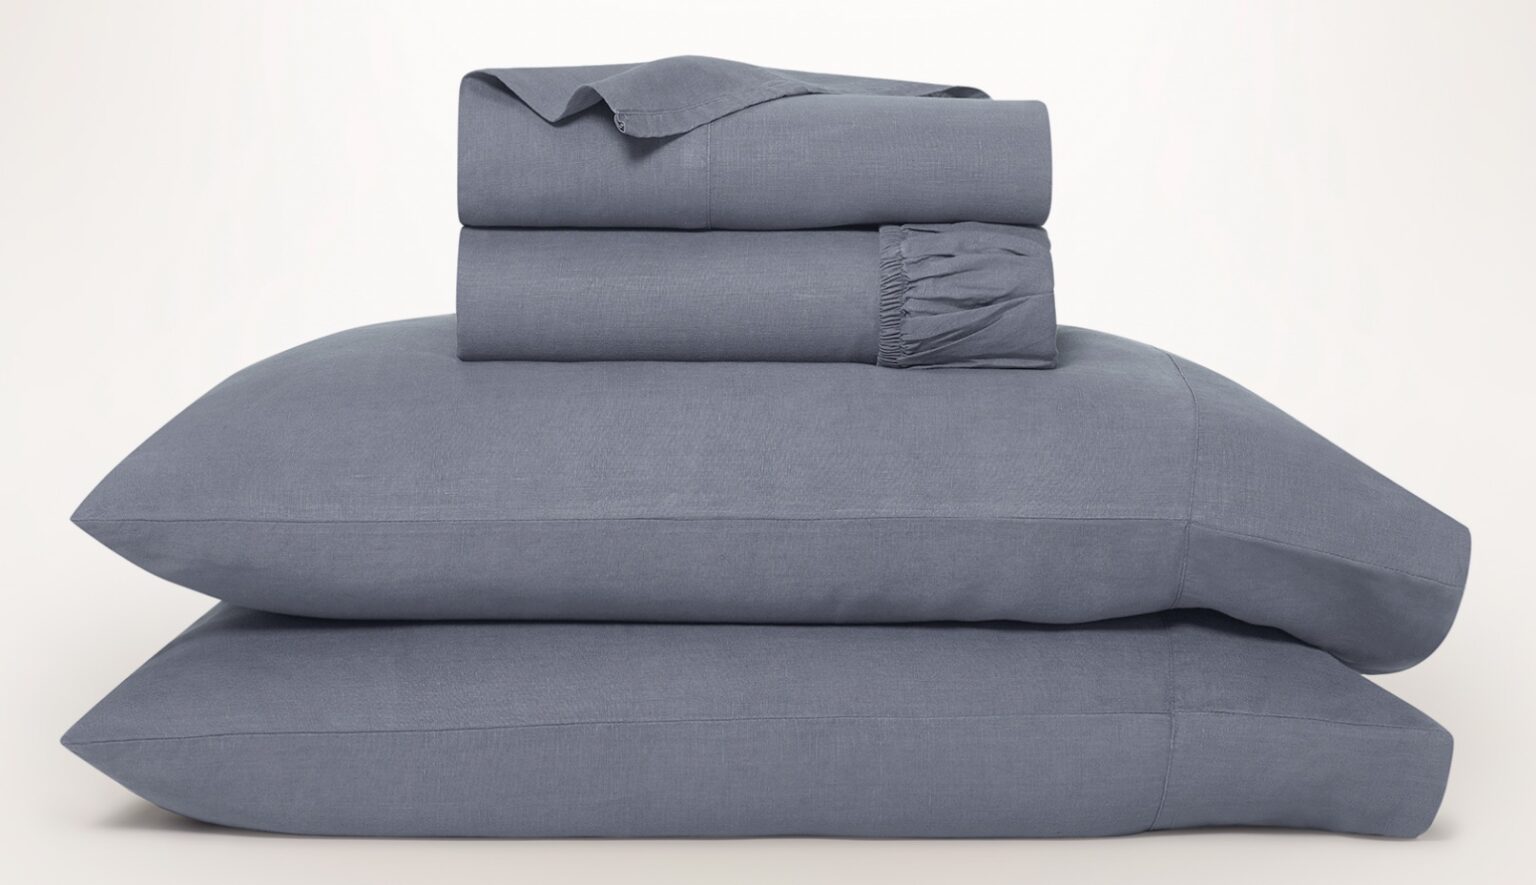 Product page photo of the Boll & Branch Linen Sheet Set